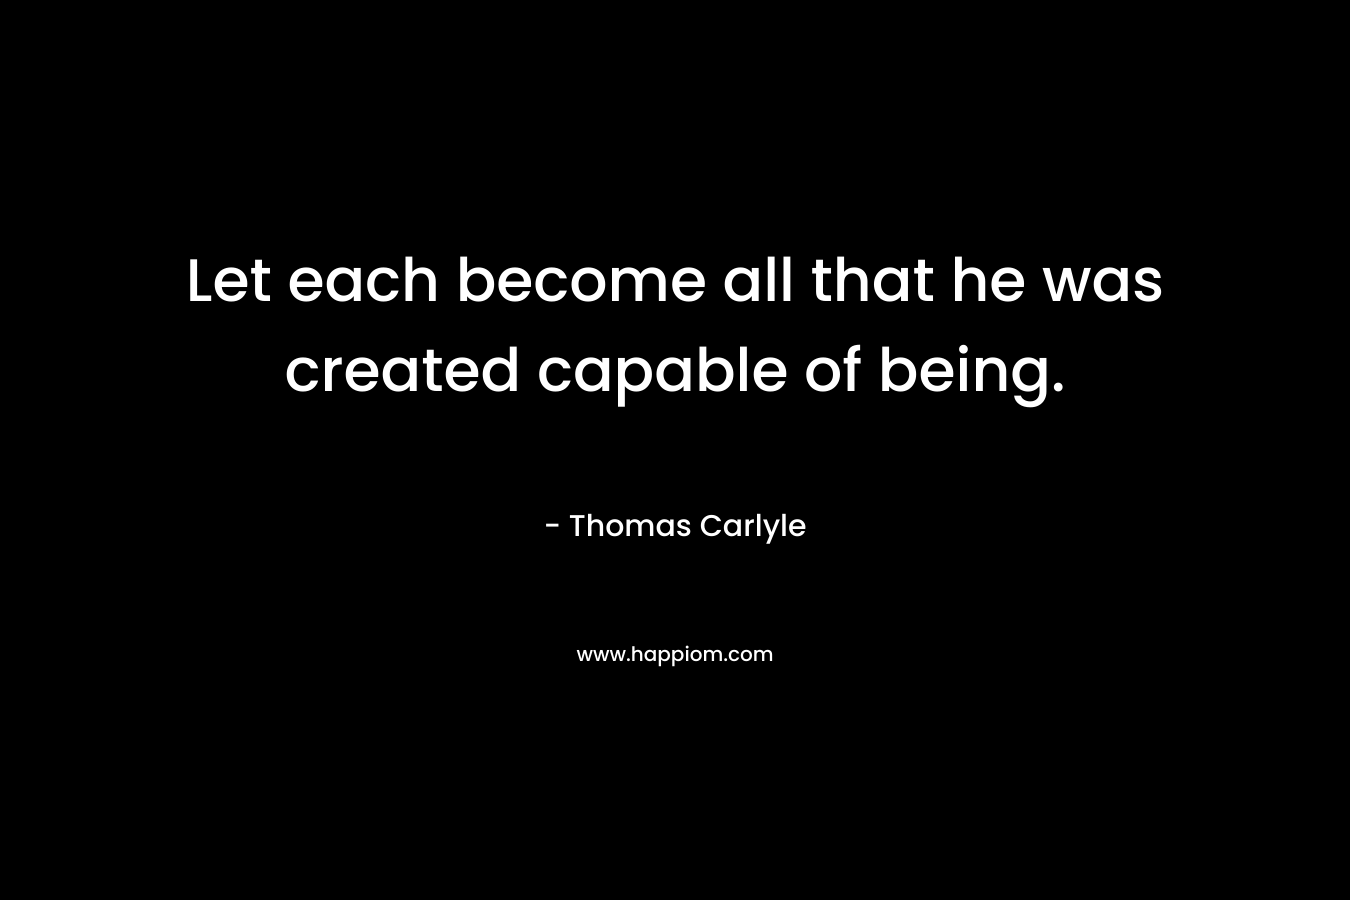 Let each become all that he was created capable of being.